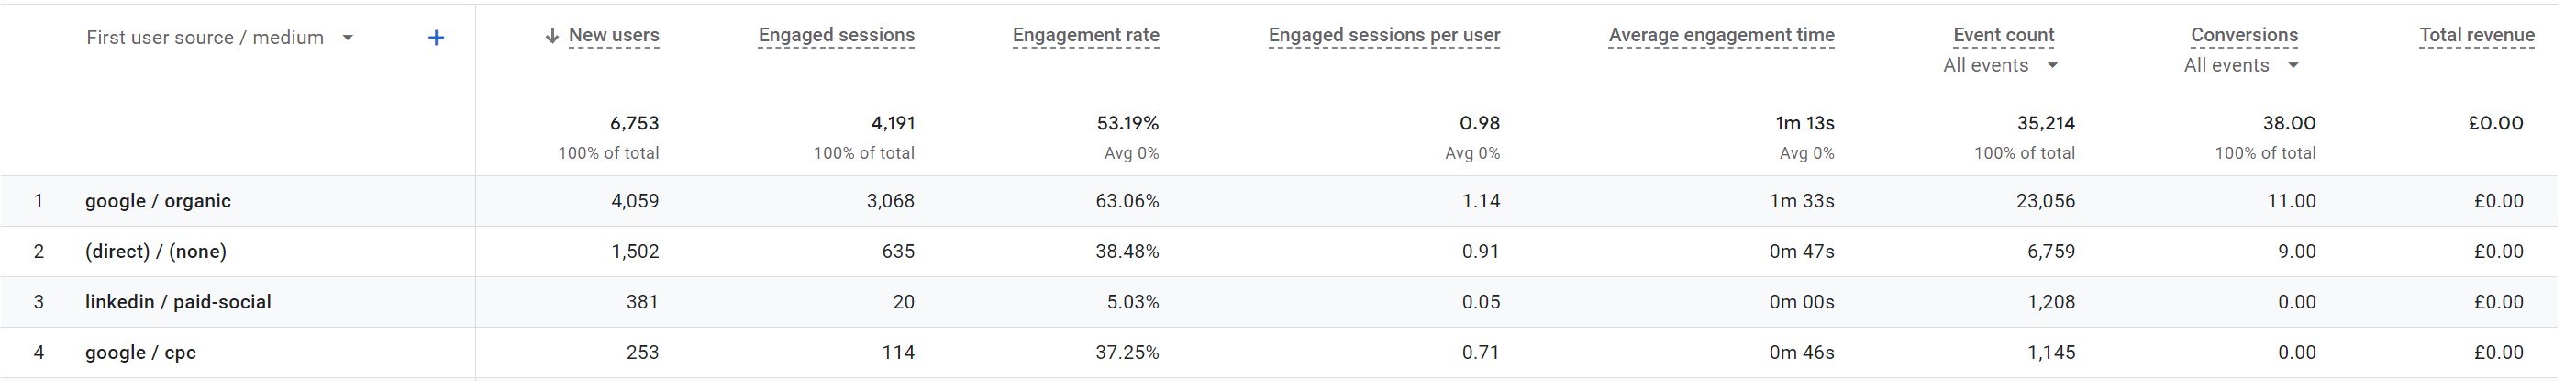 Google analytics 4 user acquisition conversions details image